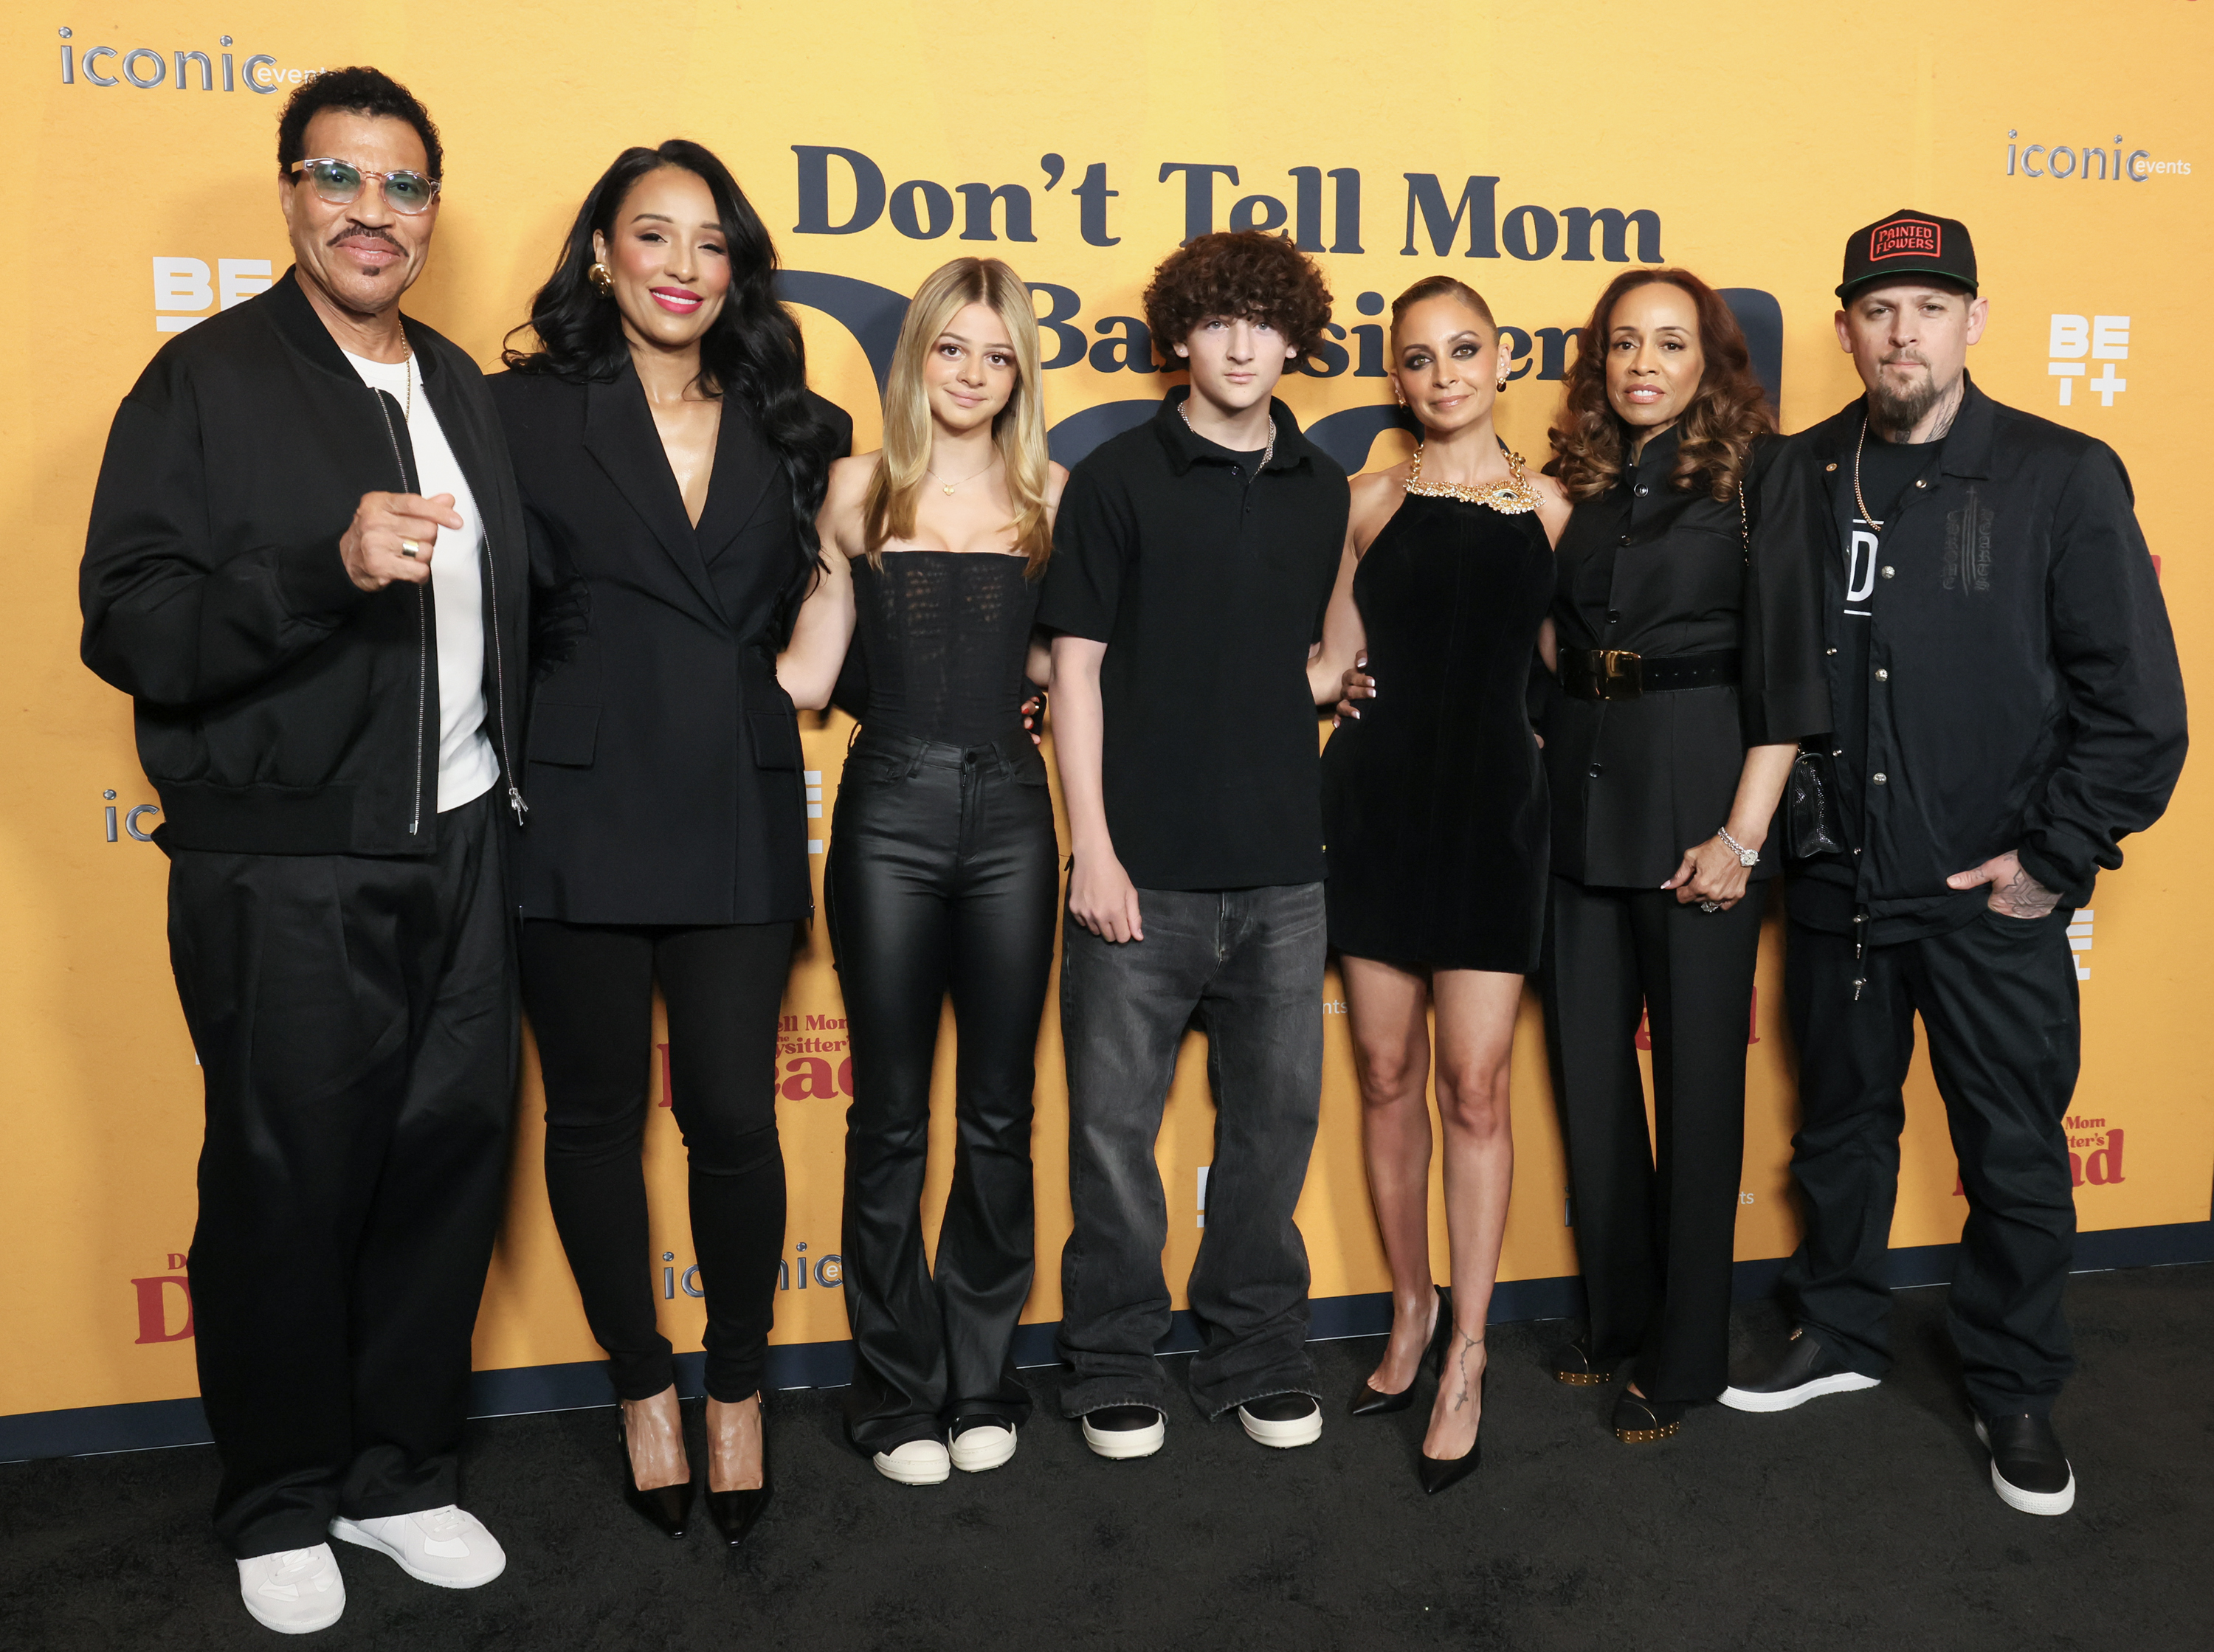 (L-R) Lionel Richie, Lisa Parigi, Harlow Madden, Sparrow Madden, Nicole Richie, Brenda Harvey-Richie, and Joel Madden at the Los Angeles premiere of "Don't Tell Mom the Babysitter's Dead," | Source: Getty Images